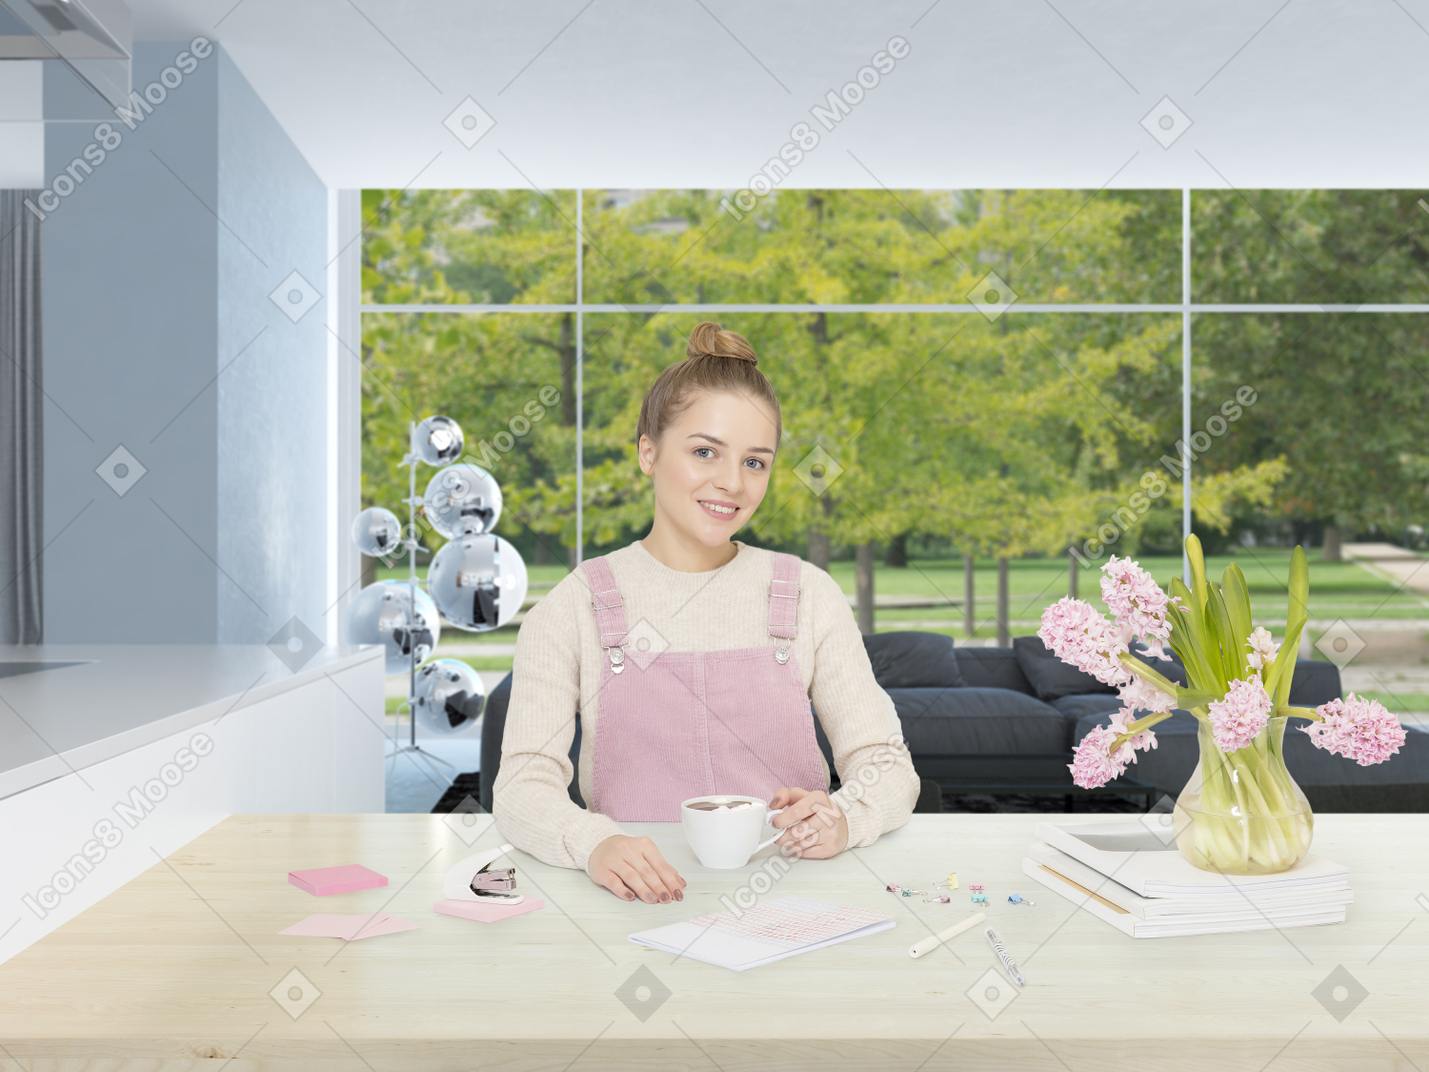 Pretty young woman in pink overalls drinking coffee in the middle of a modern-looking room among pink hyacinths and stationery